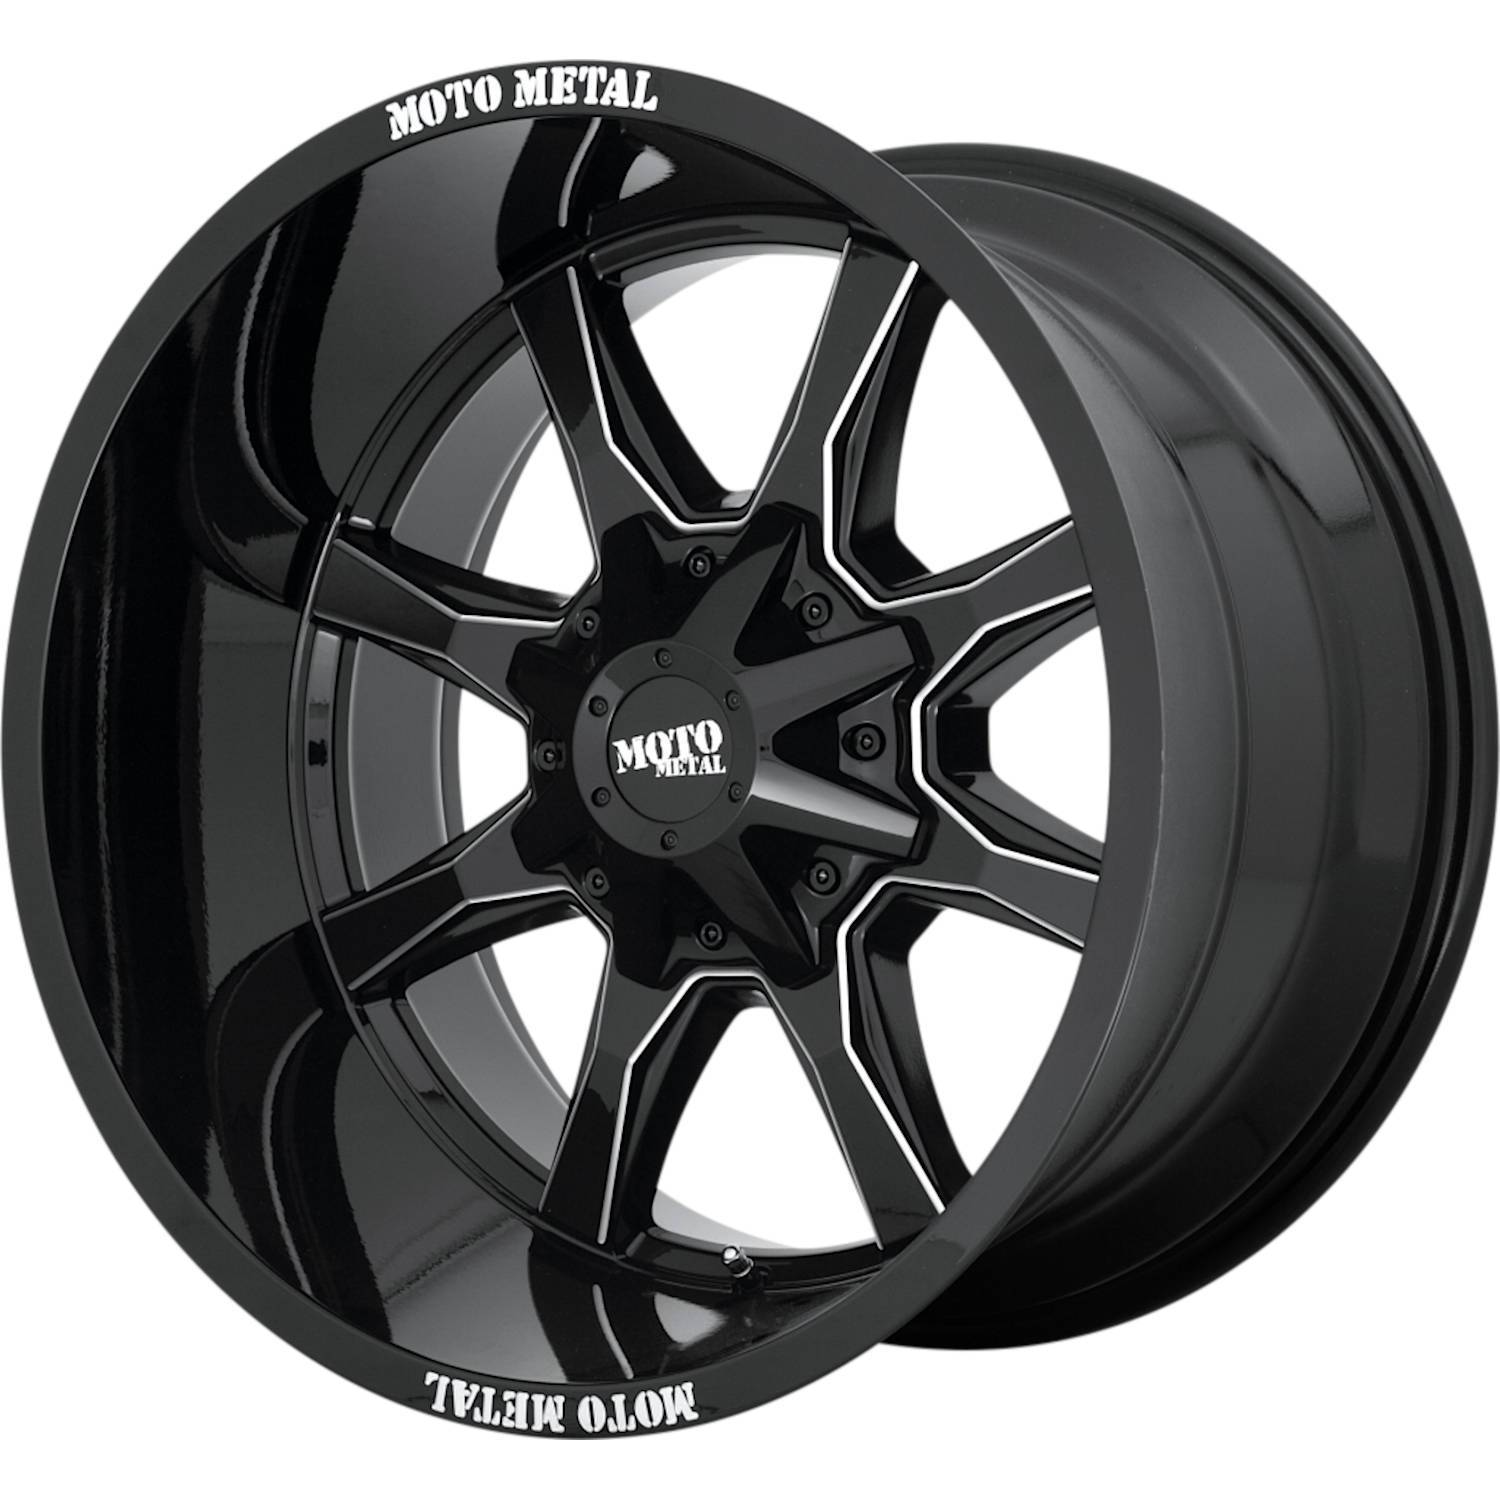 Moto Metal MO970 20x9 18 6x120/6x139.7 (6x5.5) Gloss Black with Milled Spoke Edges - Tires and Engine Performance